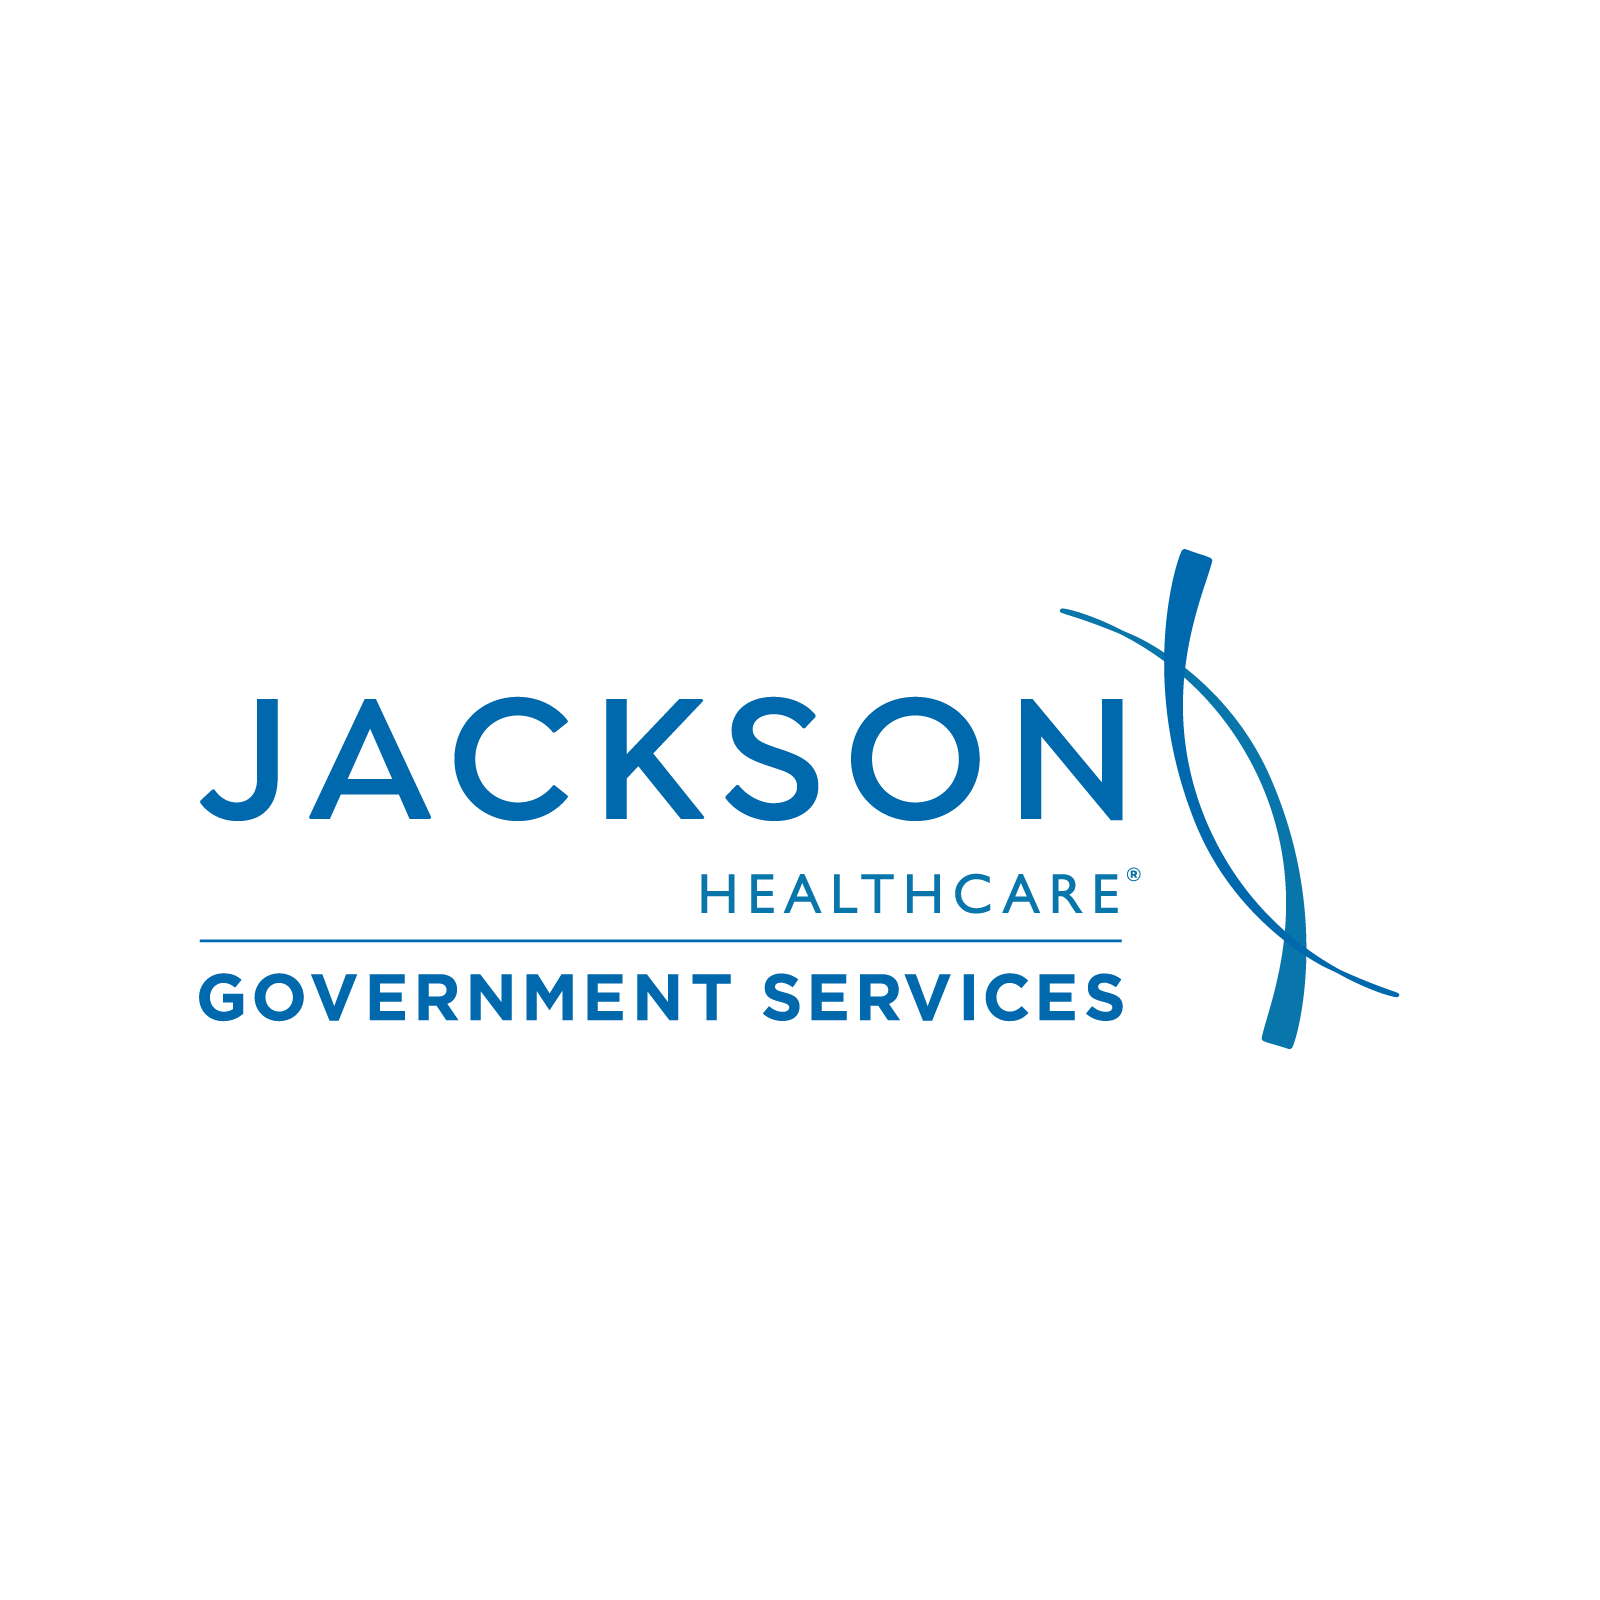 Logo for Jackson Healthcare Government Services